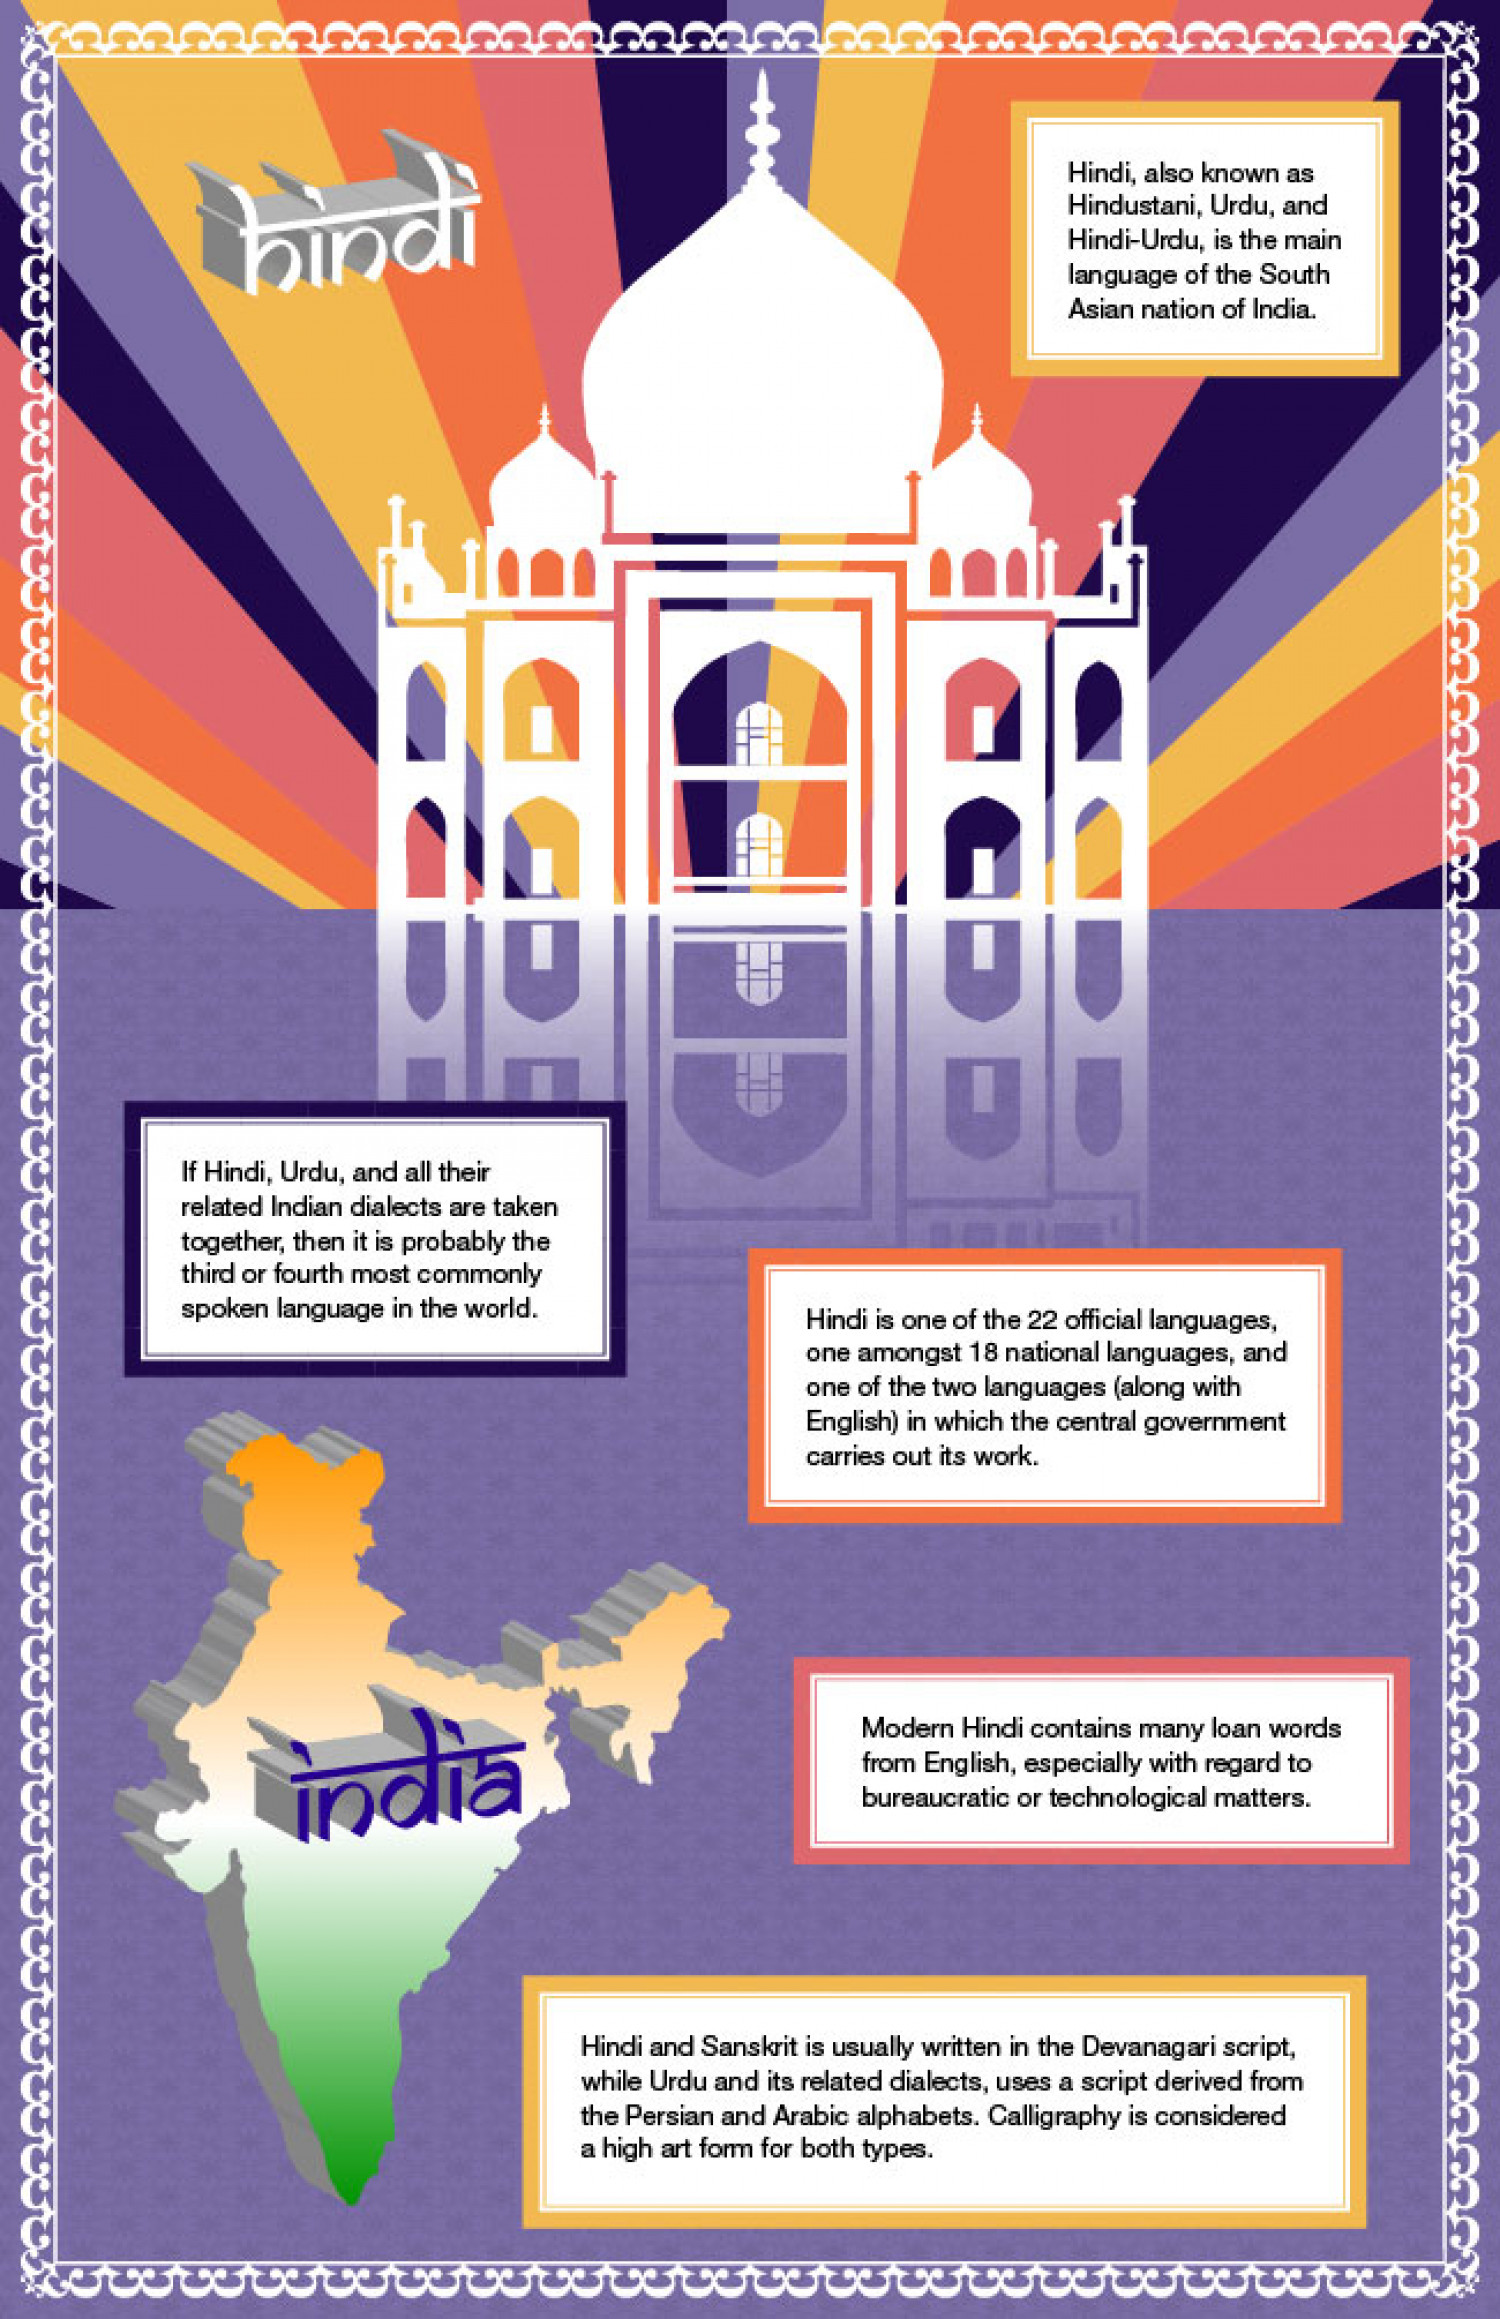 Tongues of the World: Hindi  Infographic